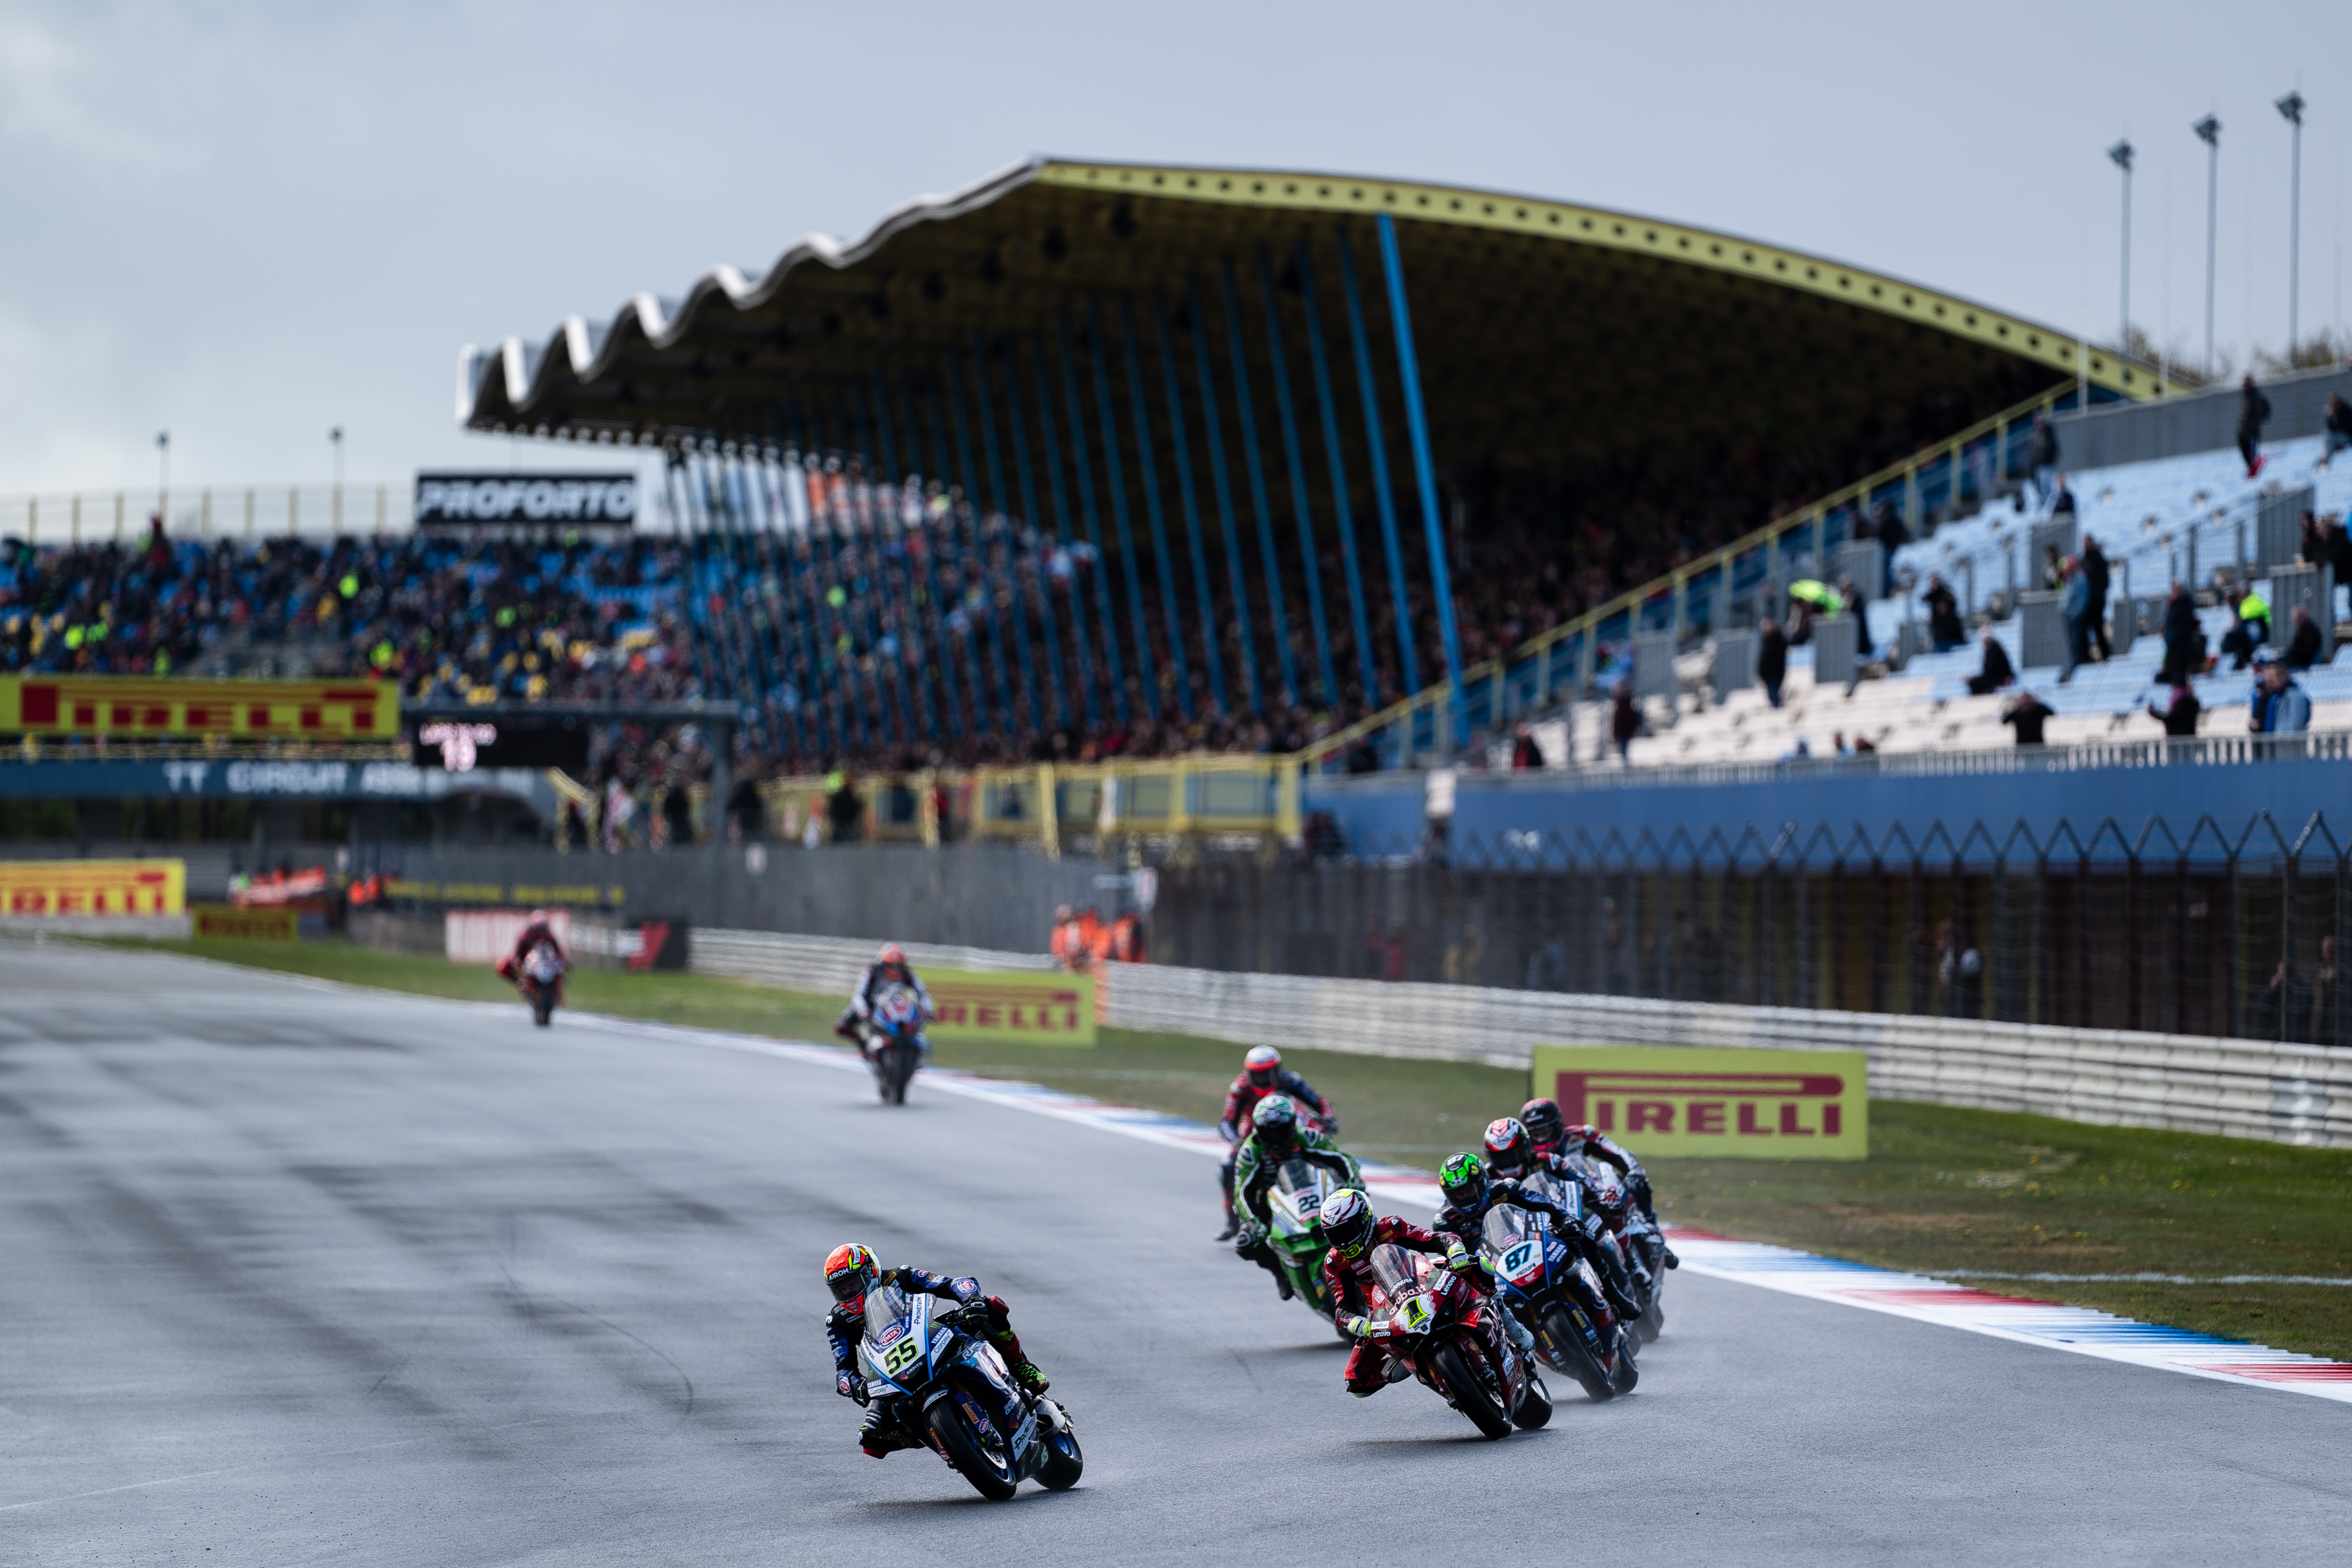 Riders experienced challenging conditions in Assen